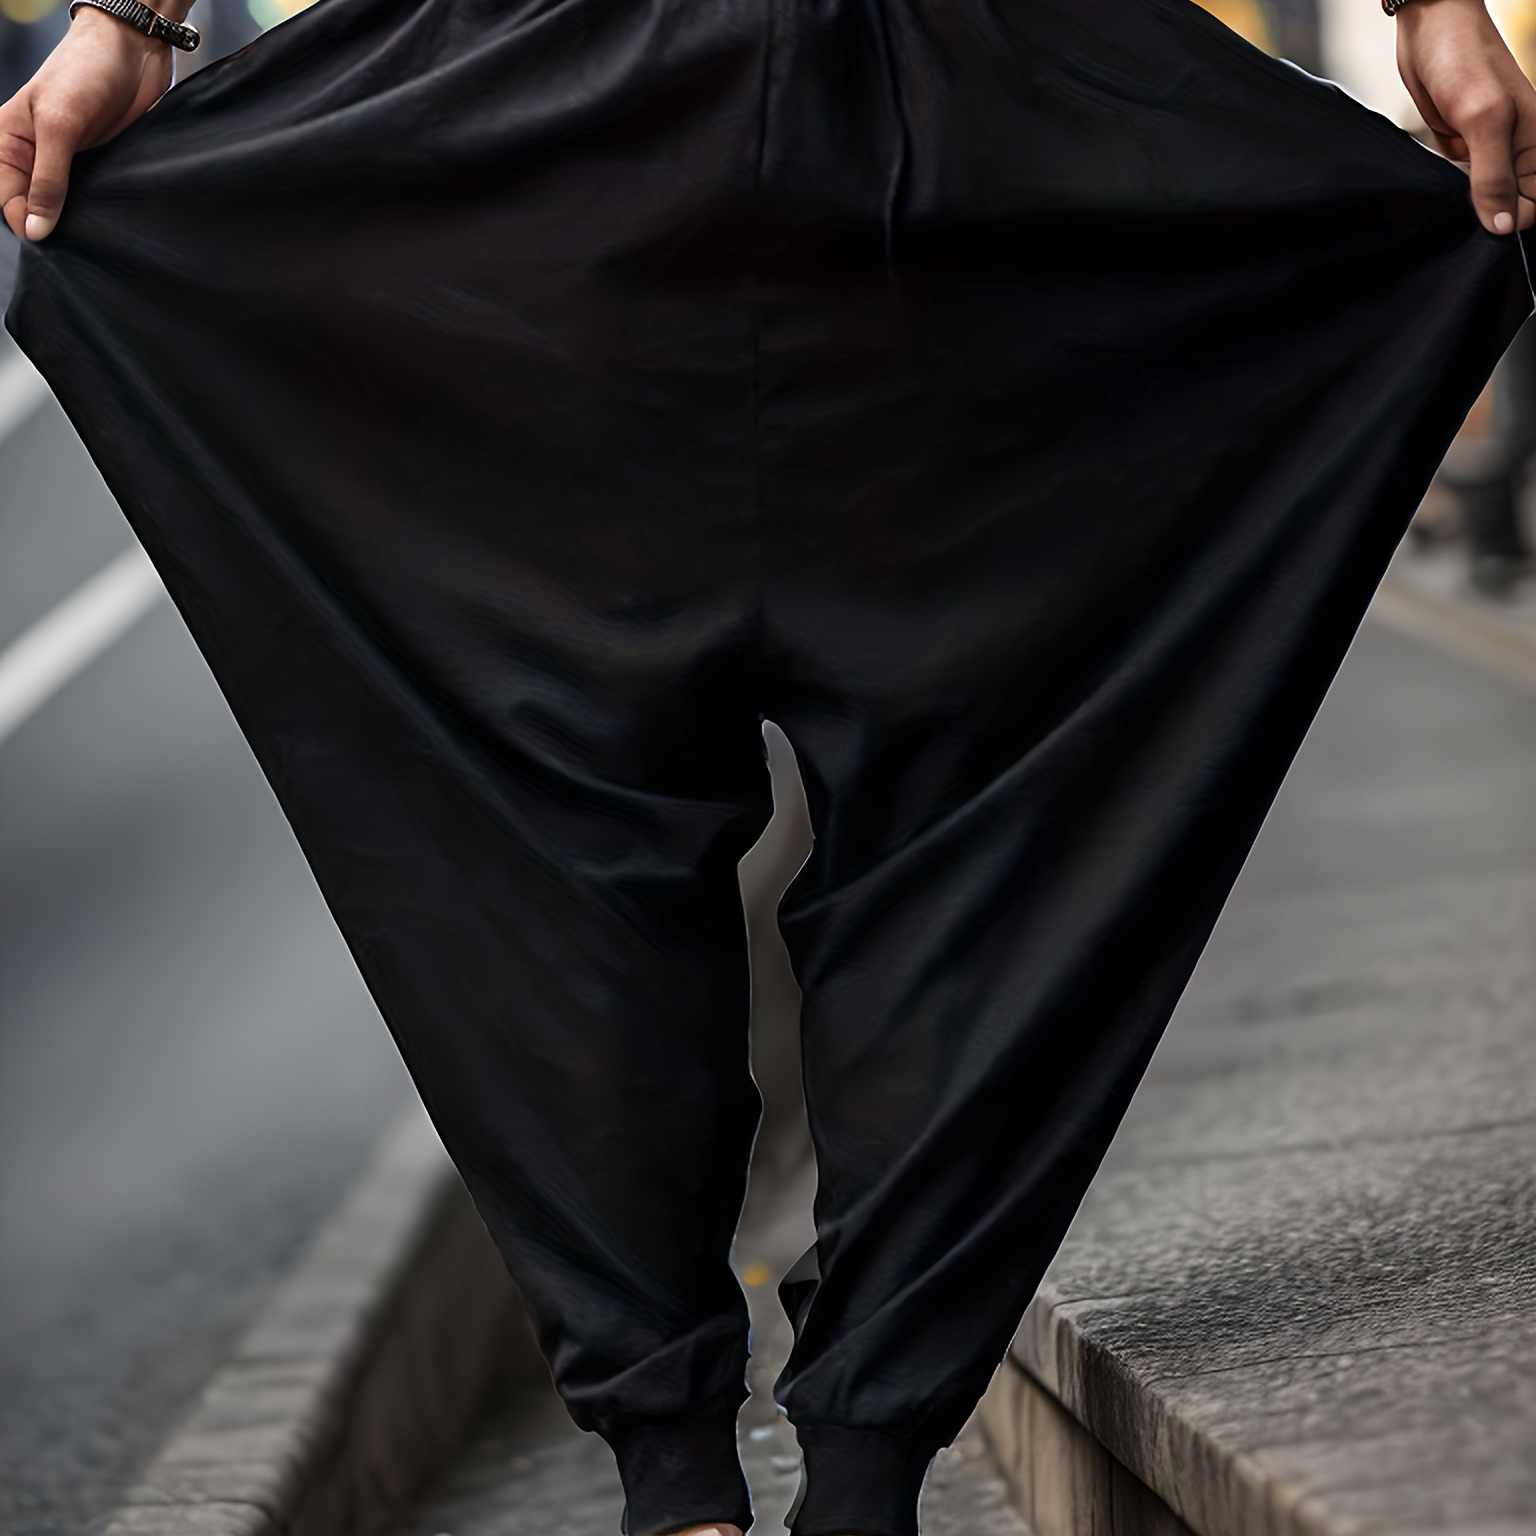 

Men's Solid Casual Loose Fit Trousers, Chic Comfy Drawstring Sports Harem Pants For Yoga Sports